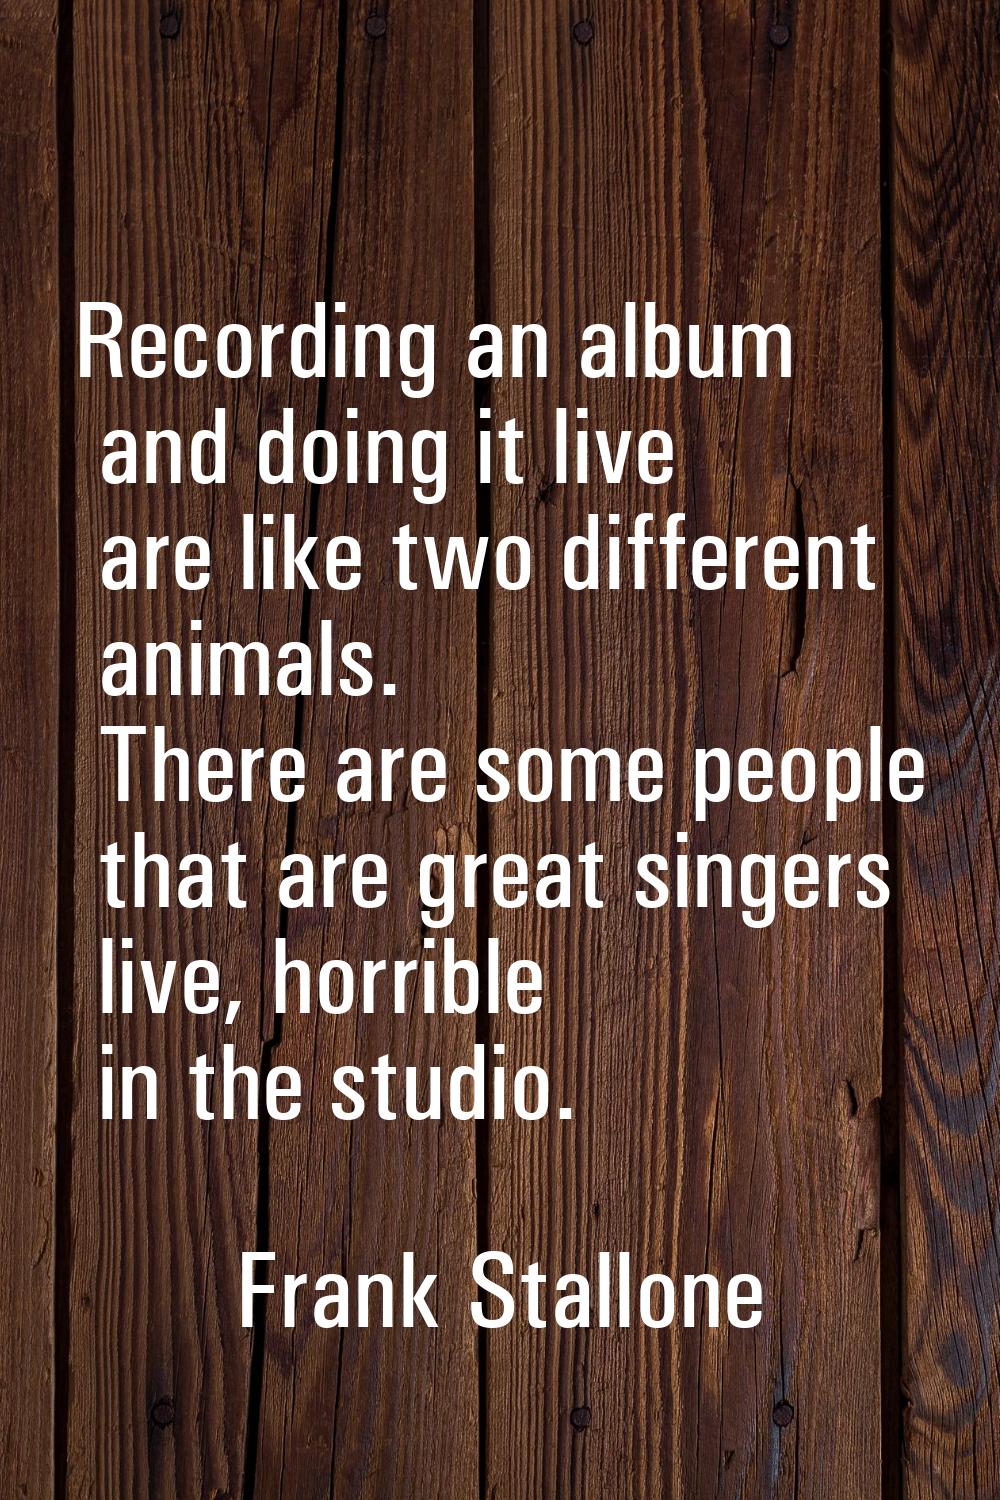 Recording an album and doing it live are like two different animals. There are some people that are